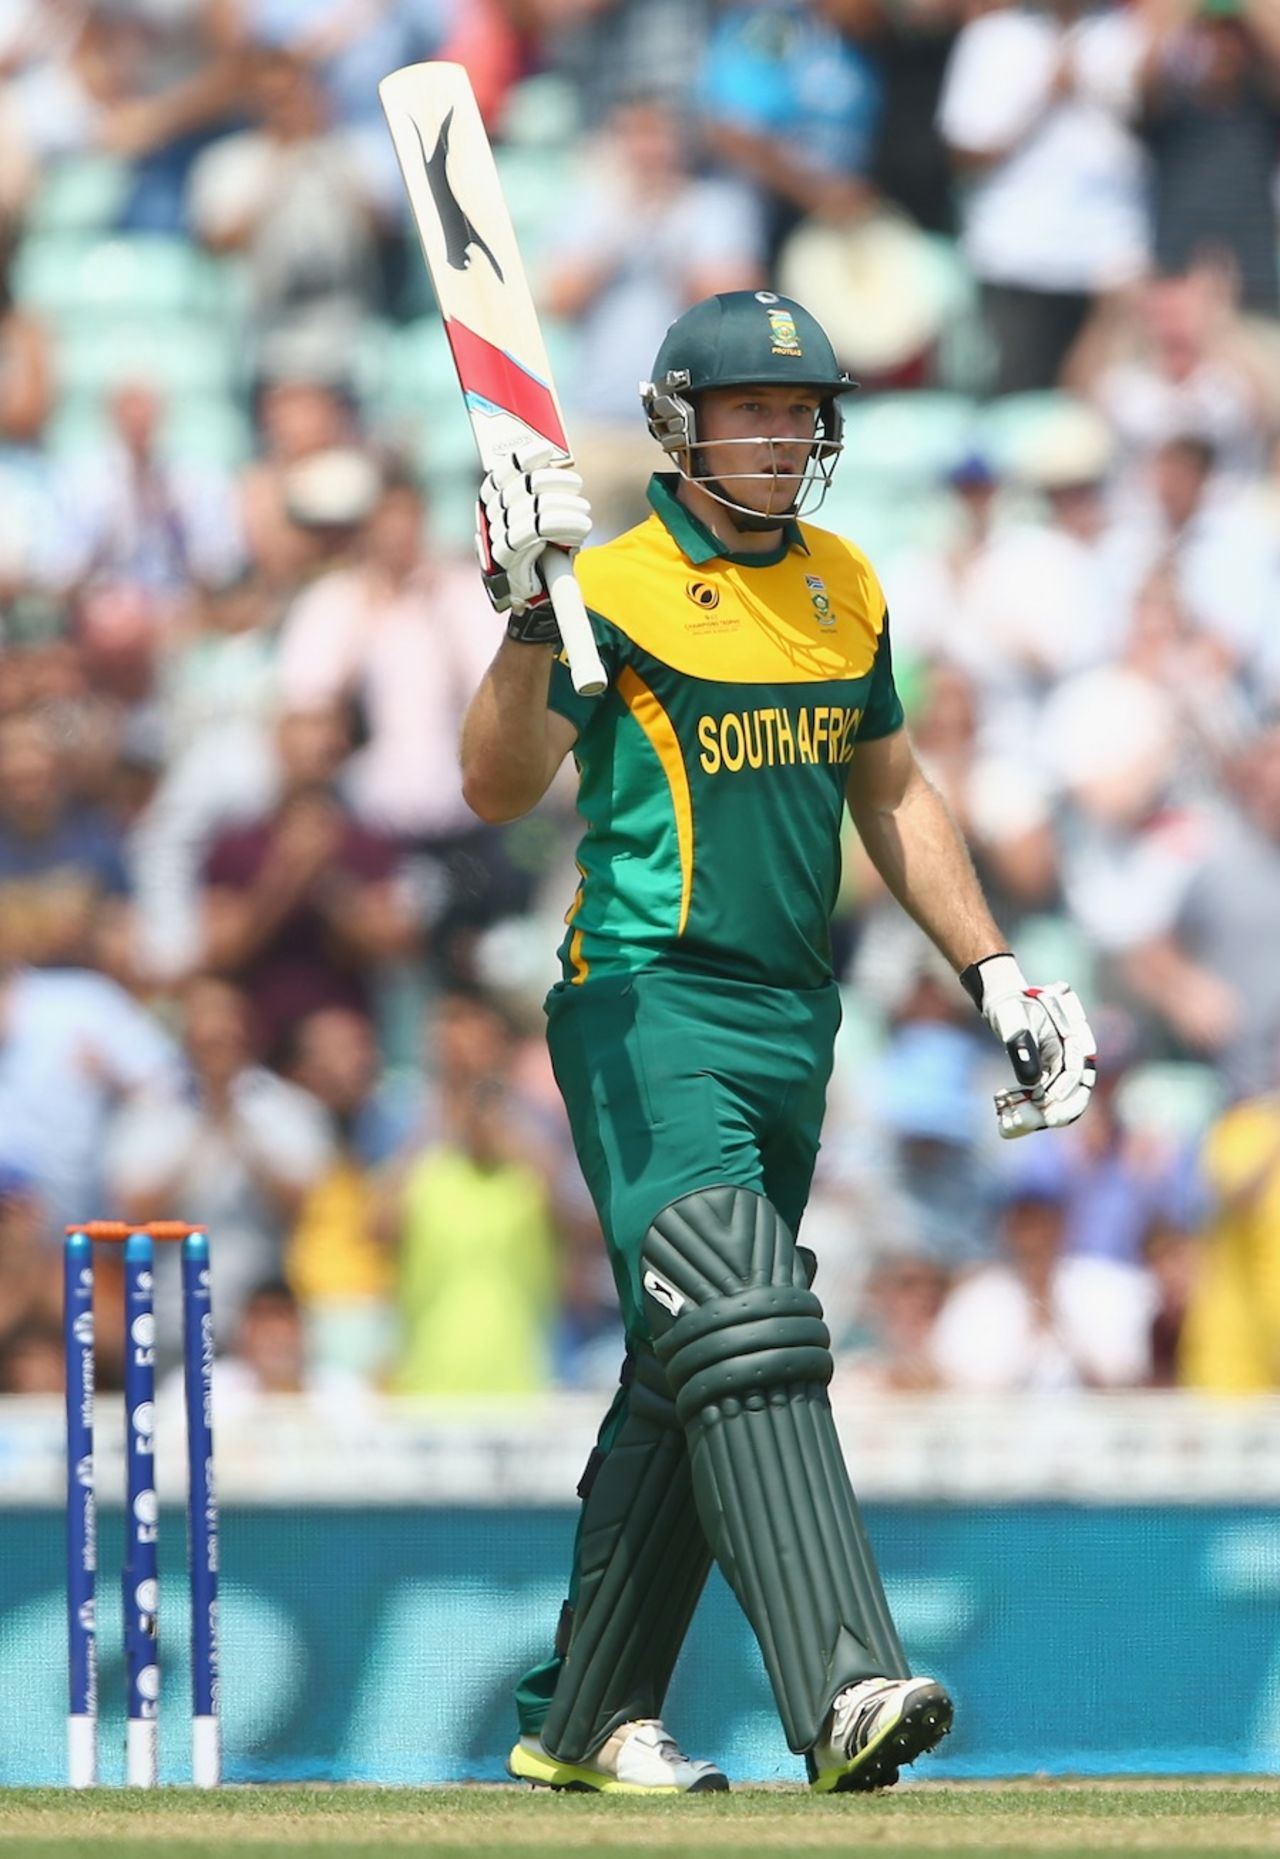 David Miller acknowledges the crowd after his fifty, England v South Africa, 1st semi-final, Champions Trophy, The Oval, June 19, 2013